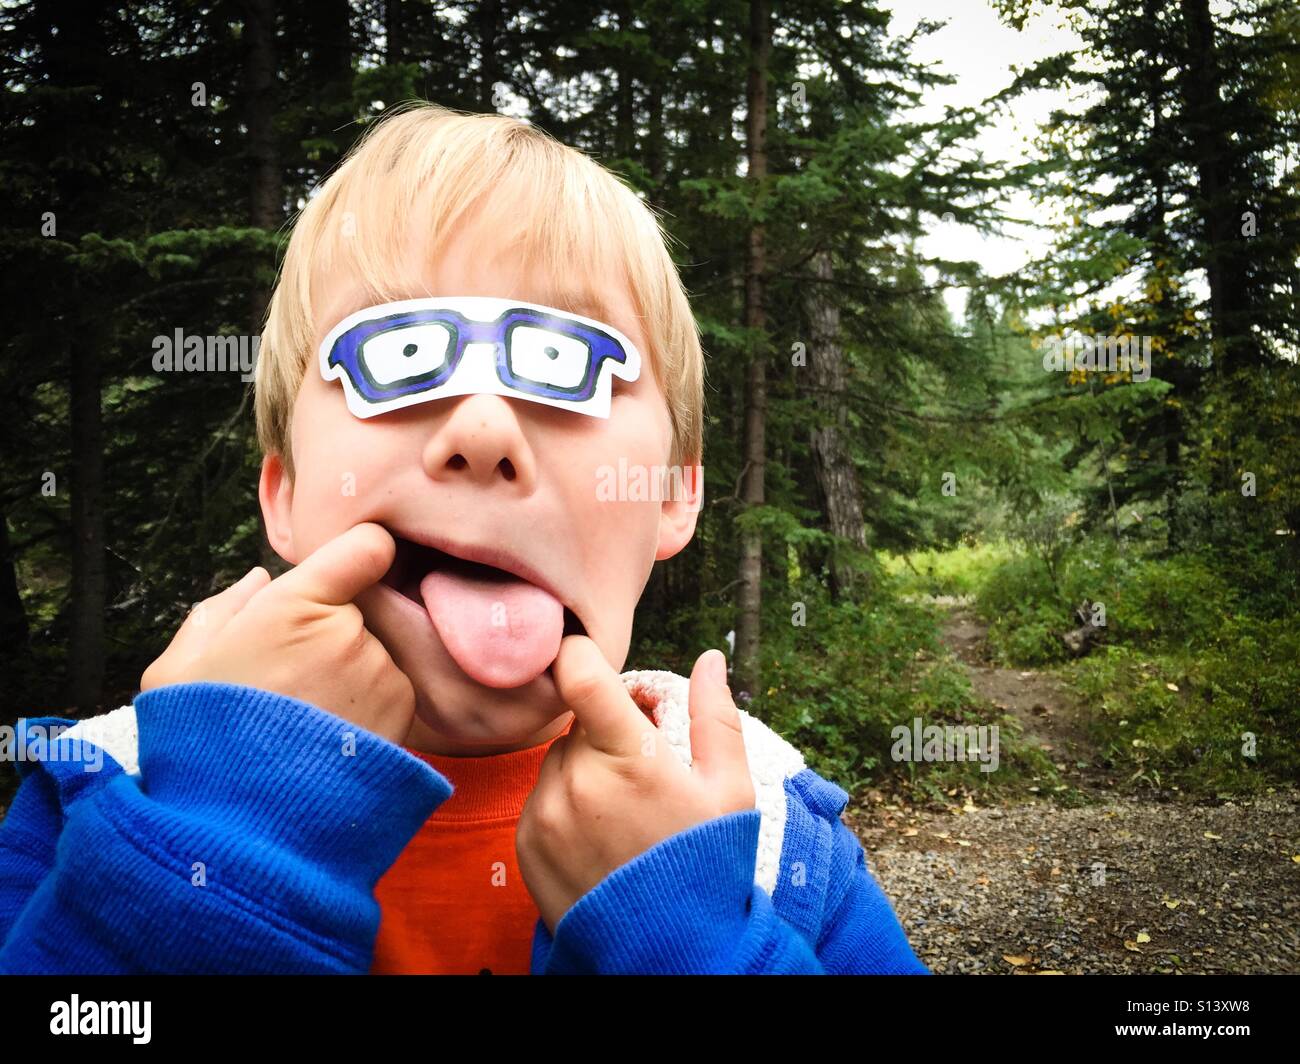 A boy playing outdoors makes a funny face. Stock Photo